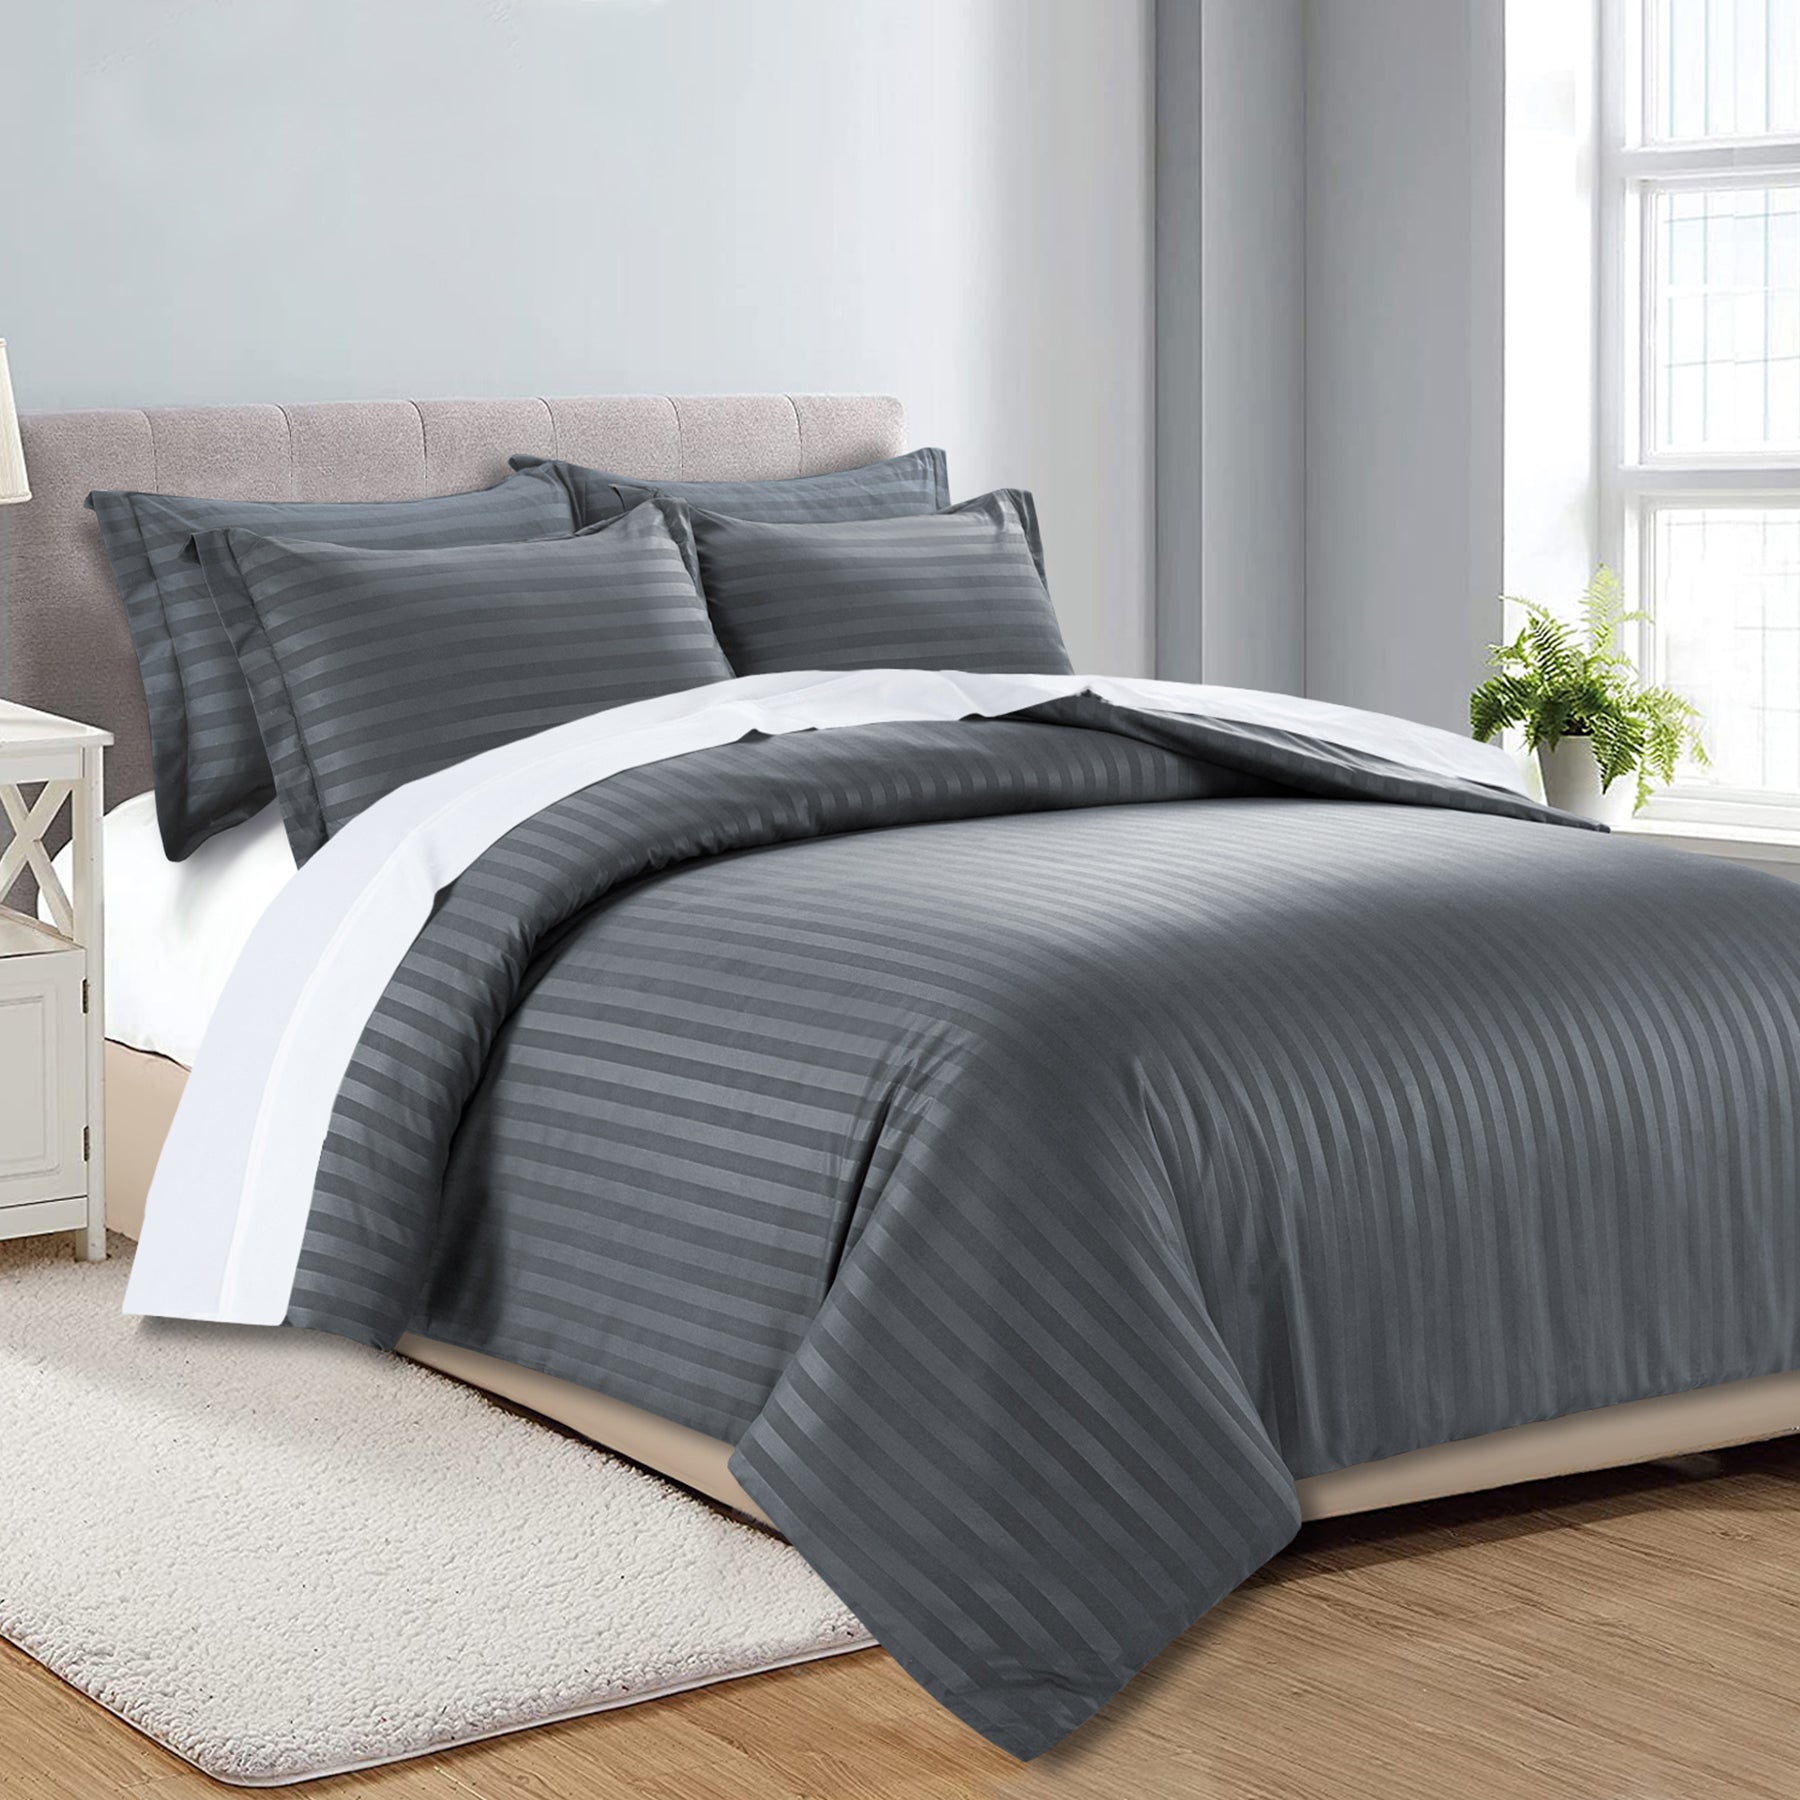 Charcoal Striped Duvet Cover